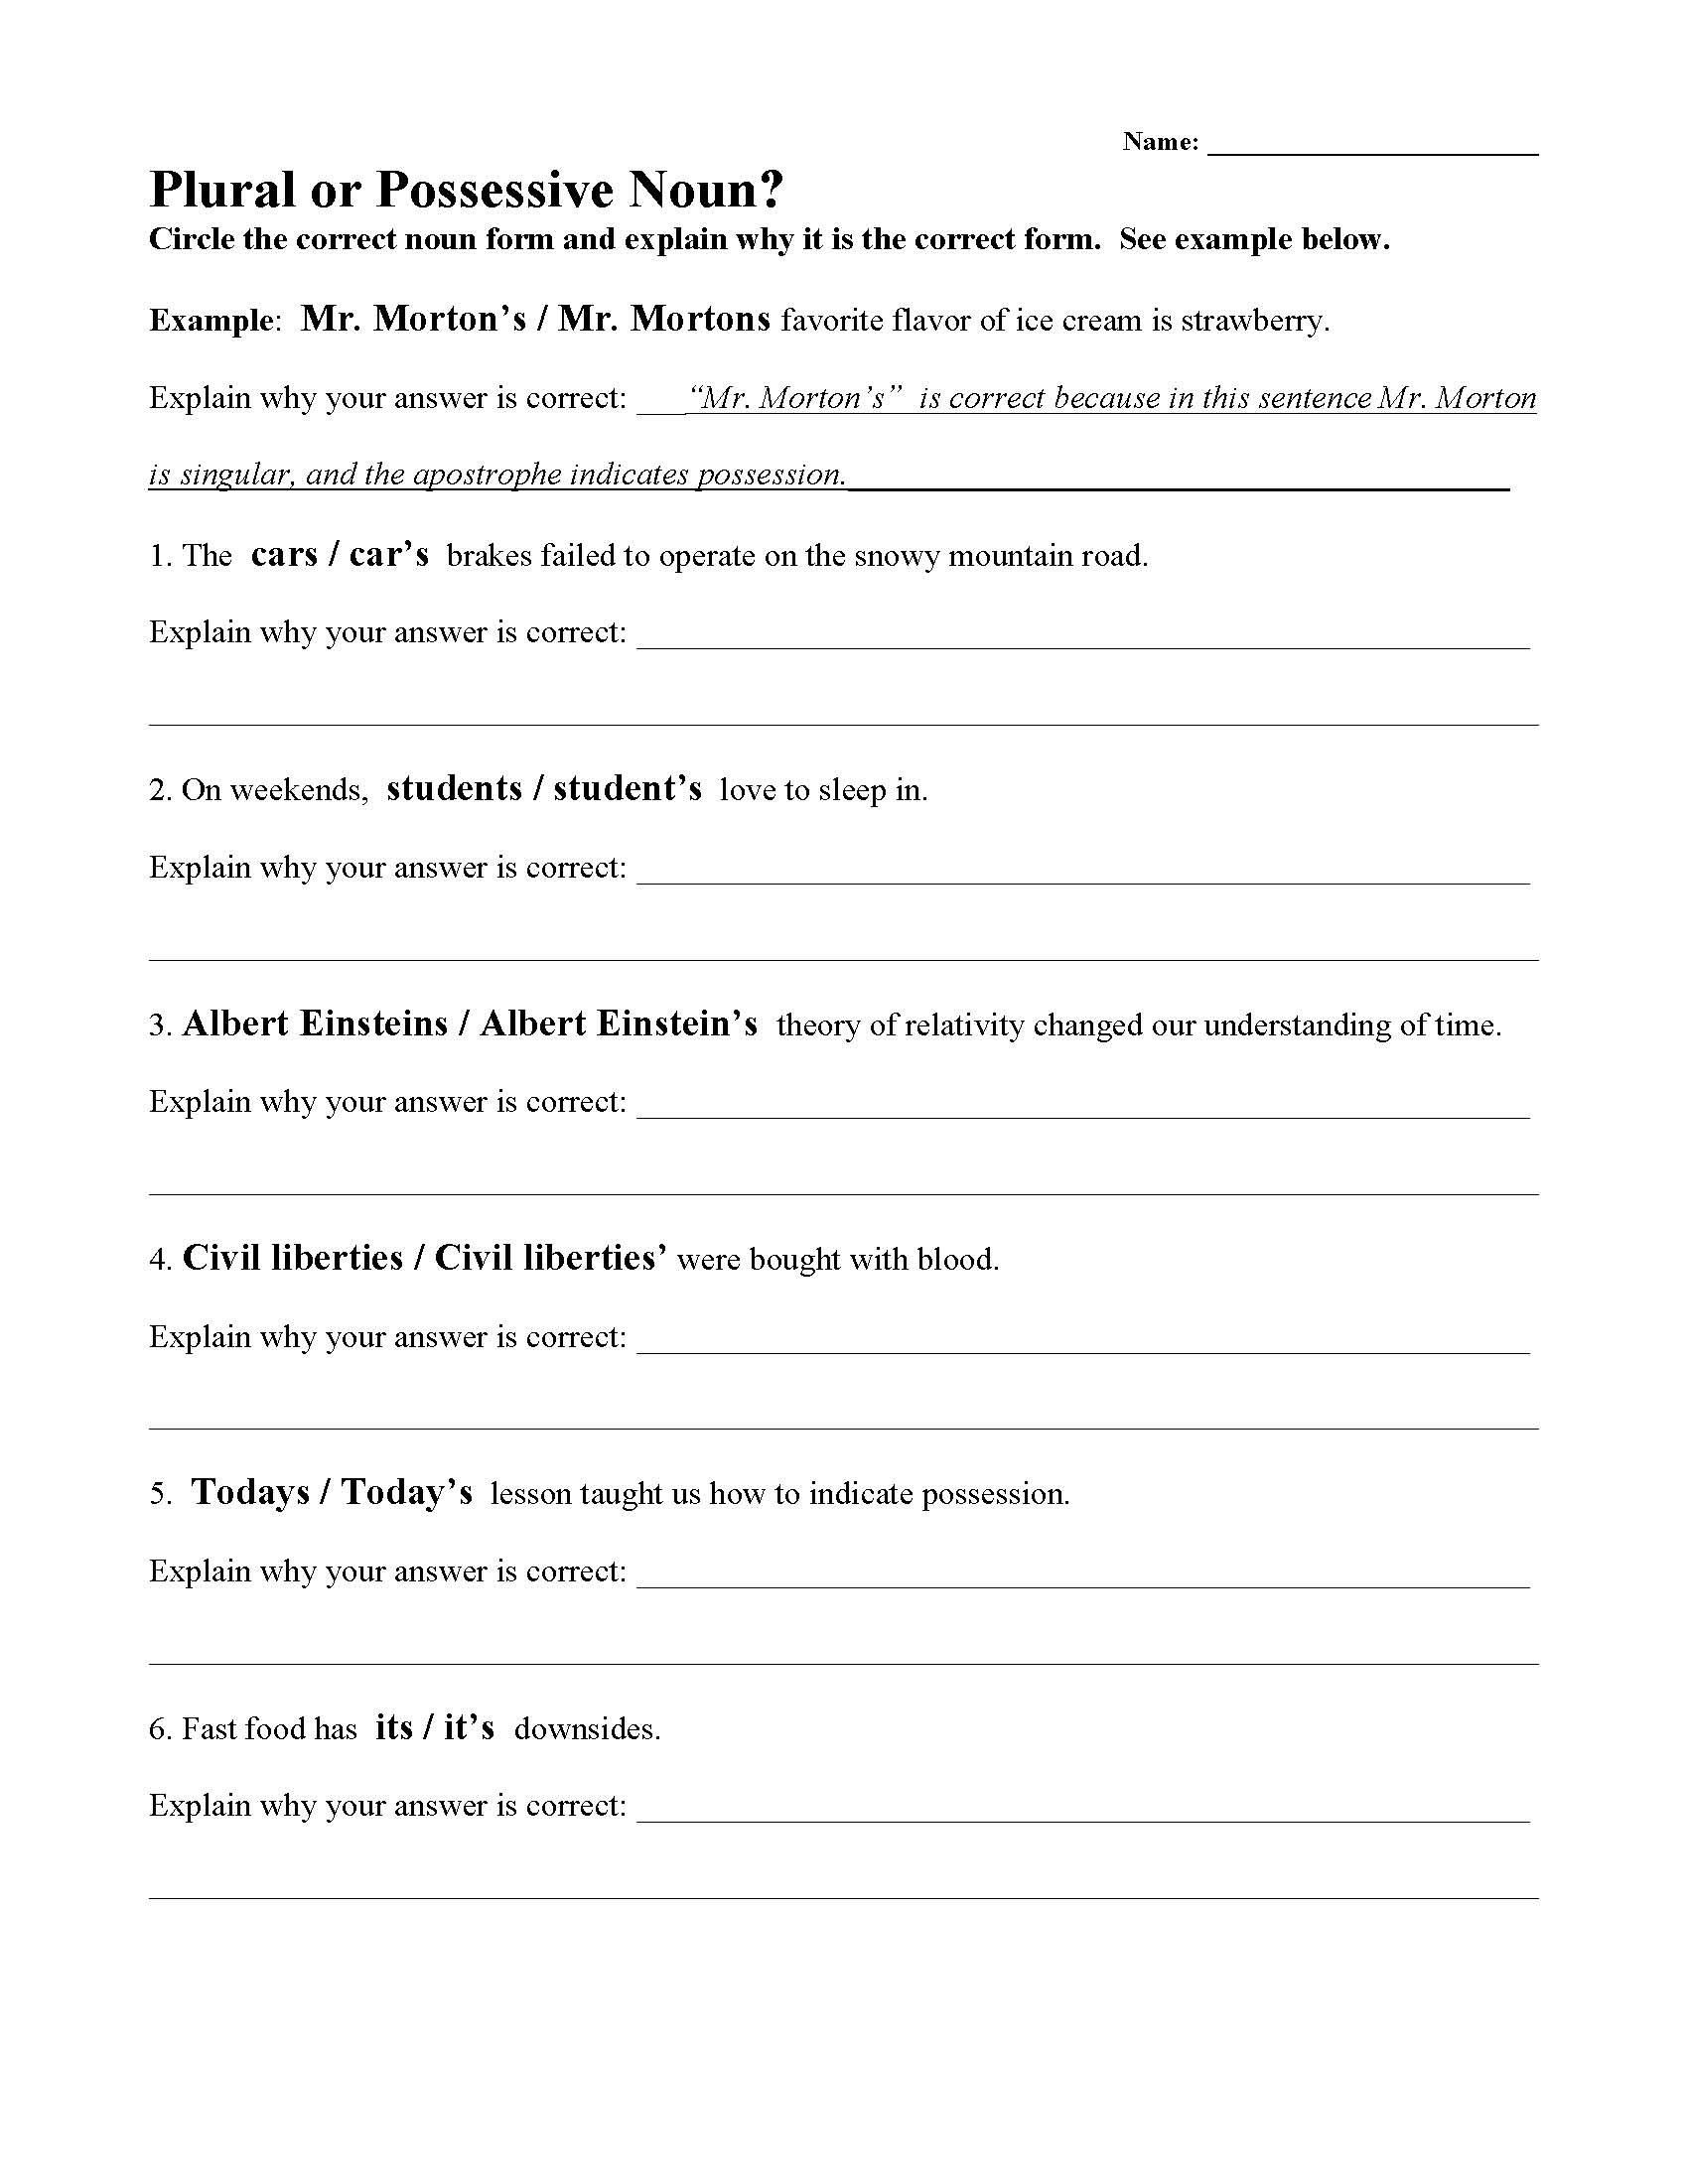 This is a preview image of Plural or Possessive Noun Worksheet. Click on it to enlarge it or view the source file.